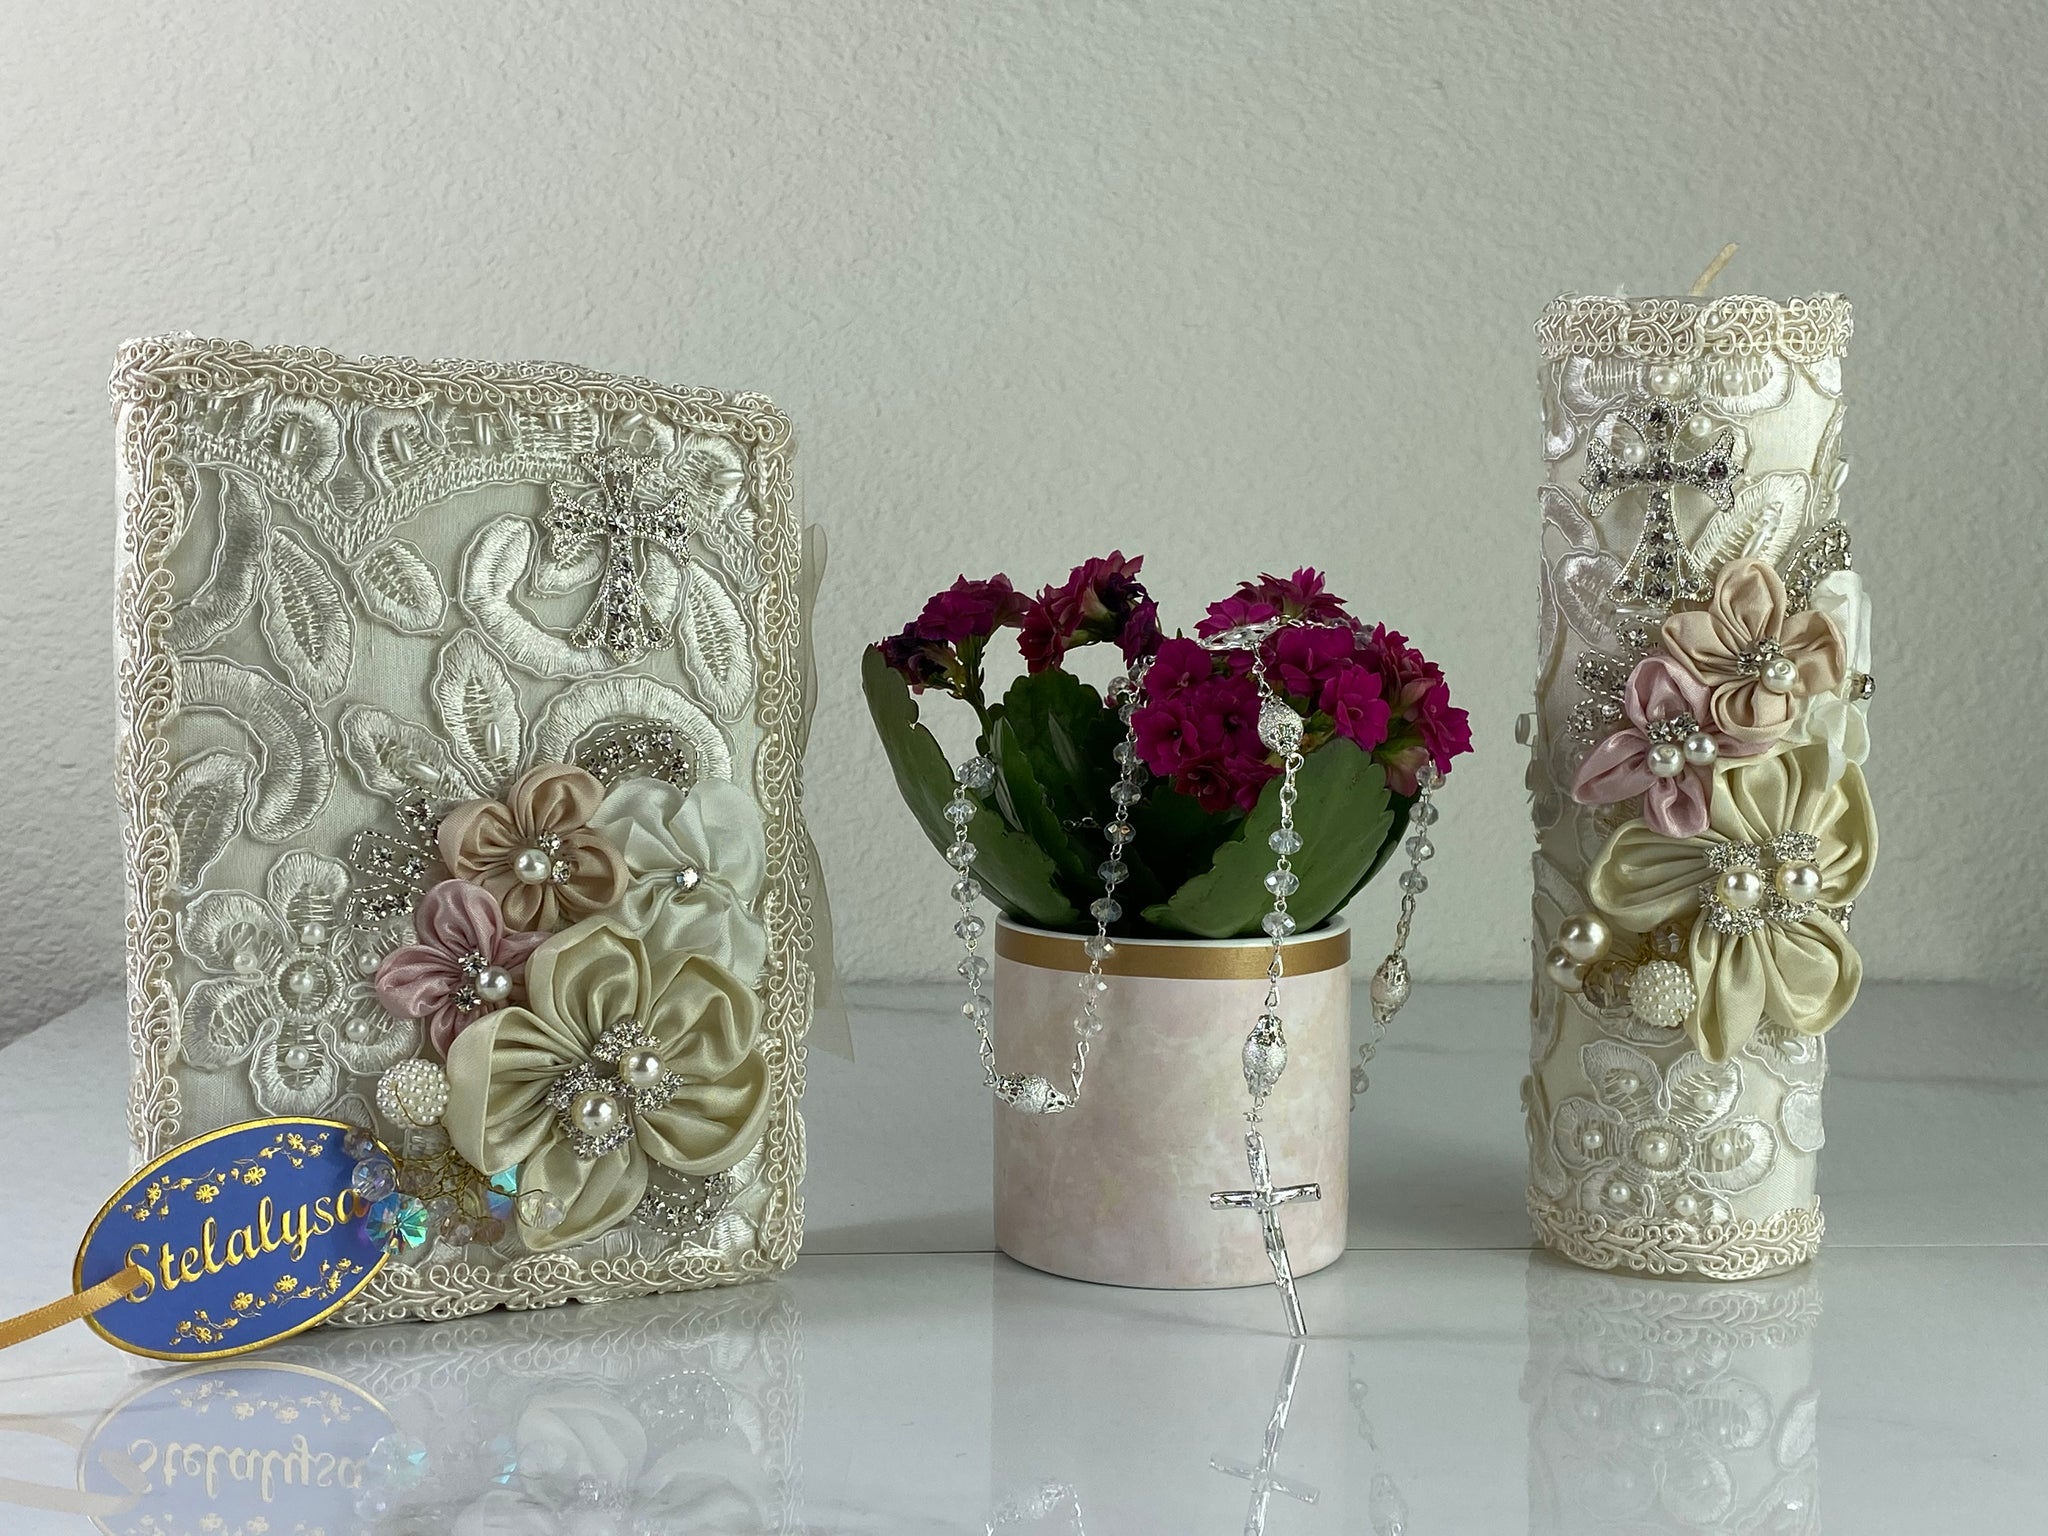 This ivory Bible Set - candle and bible is handmade and made using satin and lace.  It is elegantly designed with pearls, crystals, flowers in different pastel colors, and beads.  Each piece has a beautiful cross.  An elegant rosary complements this set.  The rosary is 16.5 in. long and Bible is 6.5 in. by 4.5 in. and the candles approximately the same height.  The Bible includes the Old and New Testament in English. 